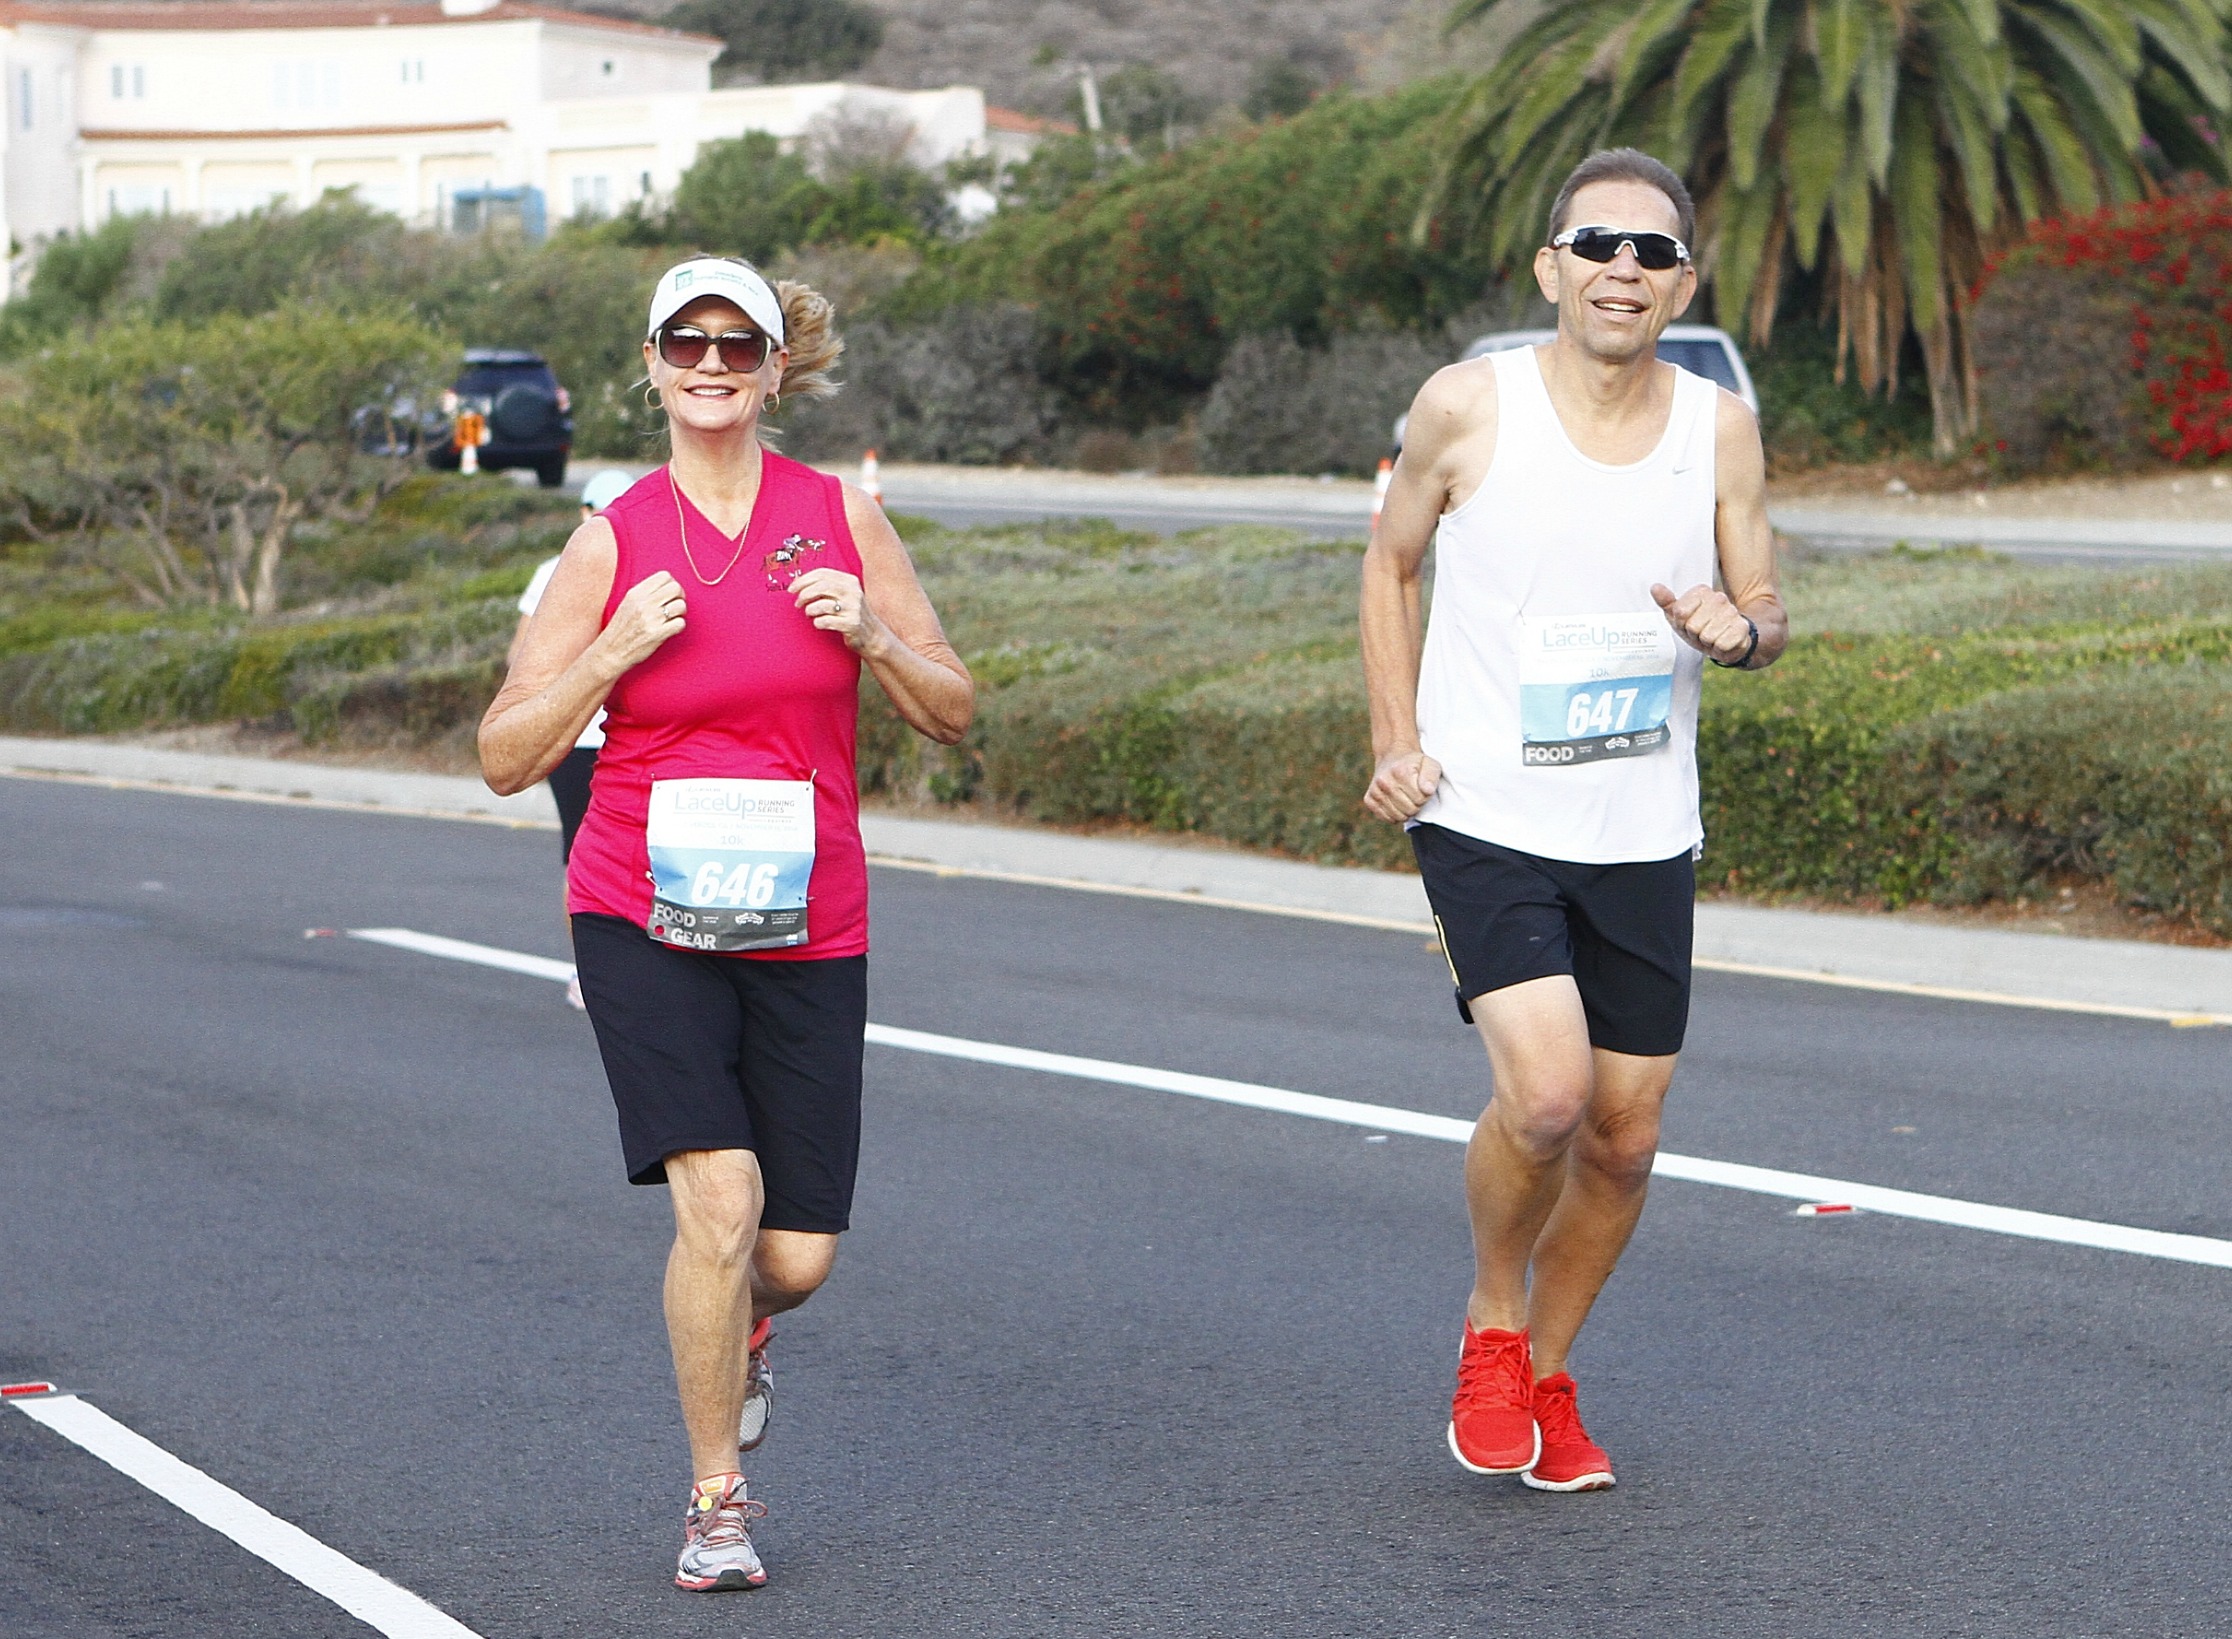 Steve Chaffee, with his fiancee Joan Brennan, continues to participate in 10k races.  (Photo/2014 Lexus LaceUp Running Series)